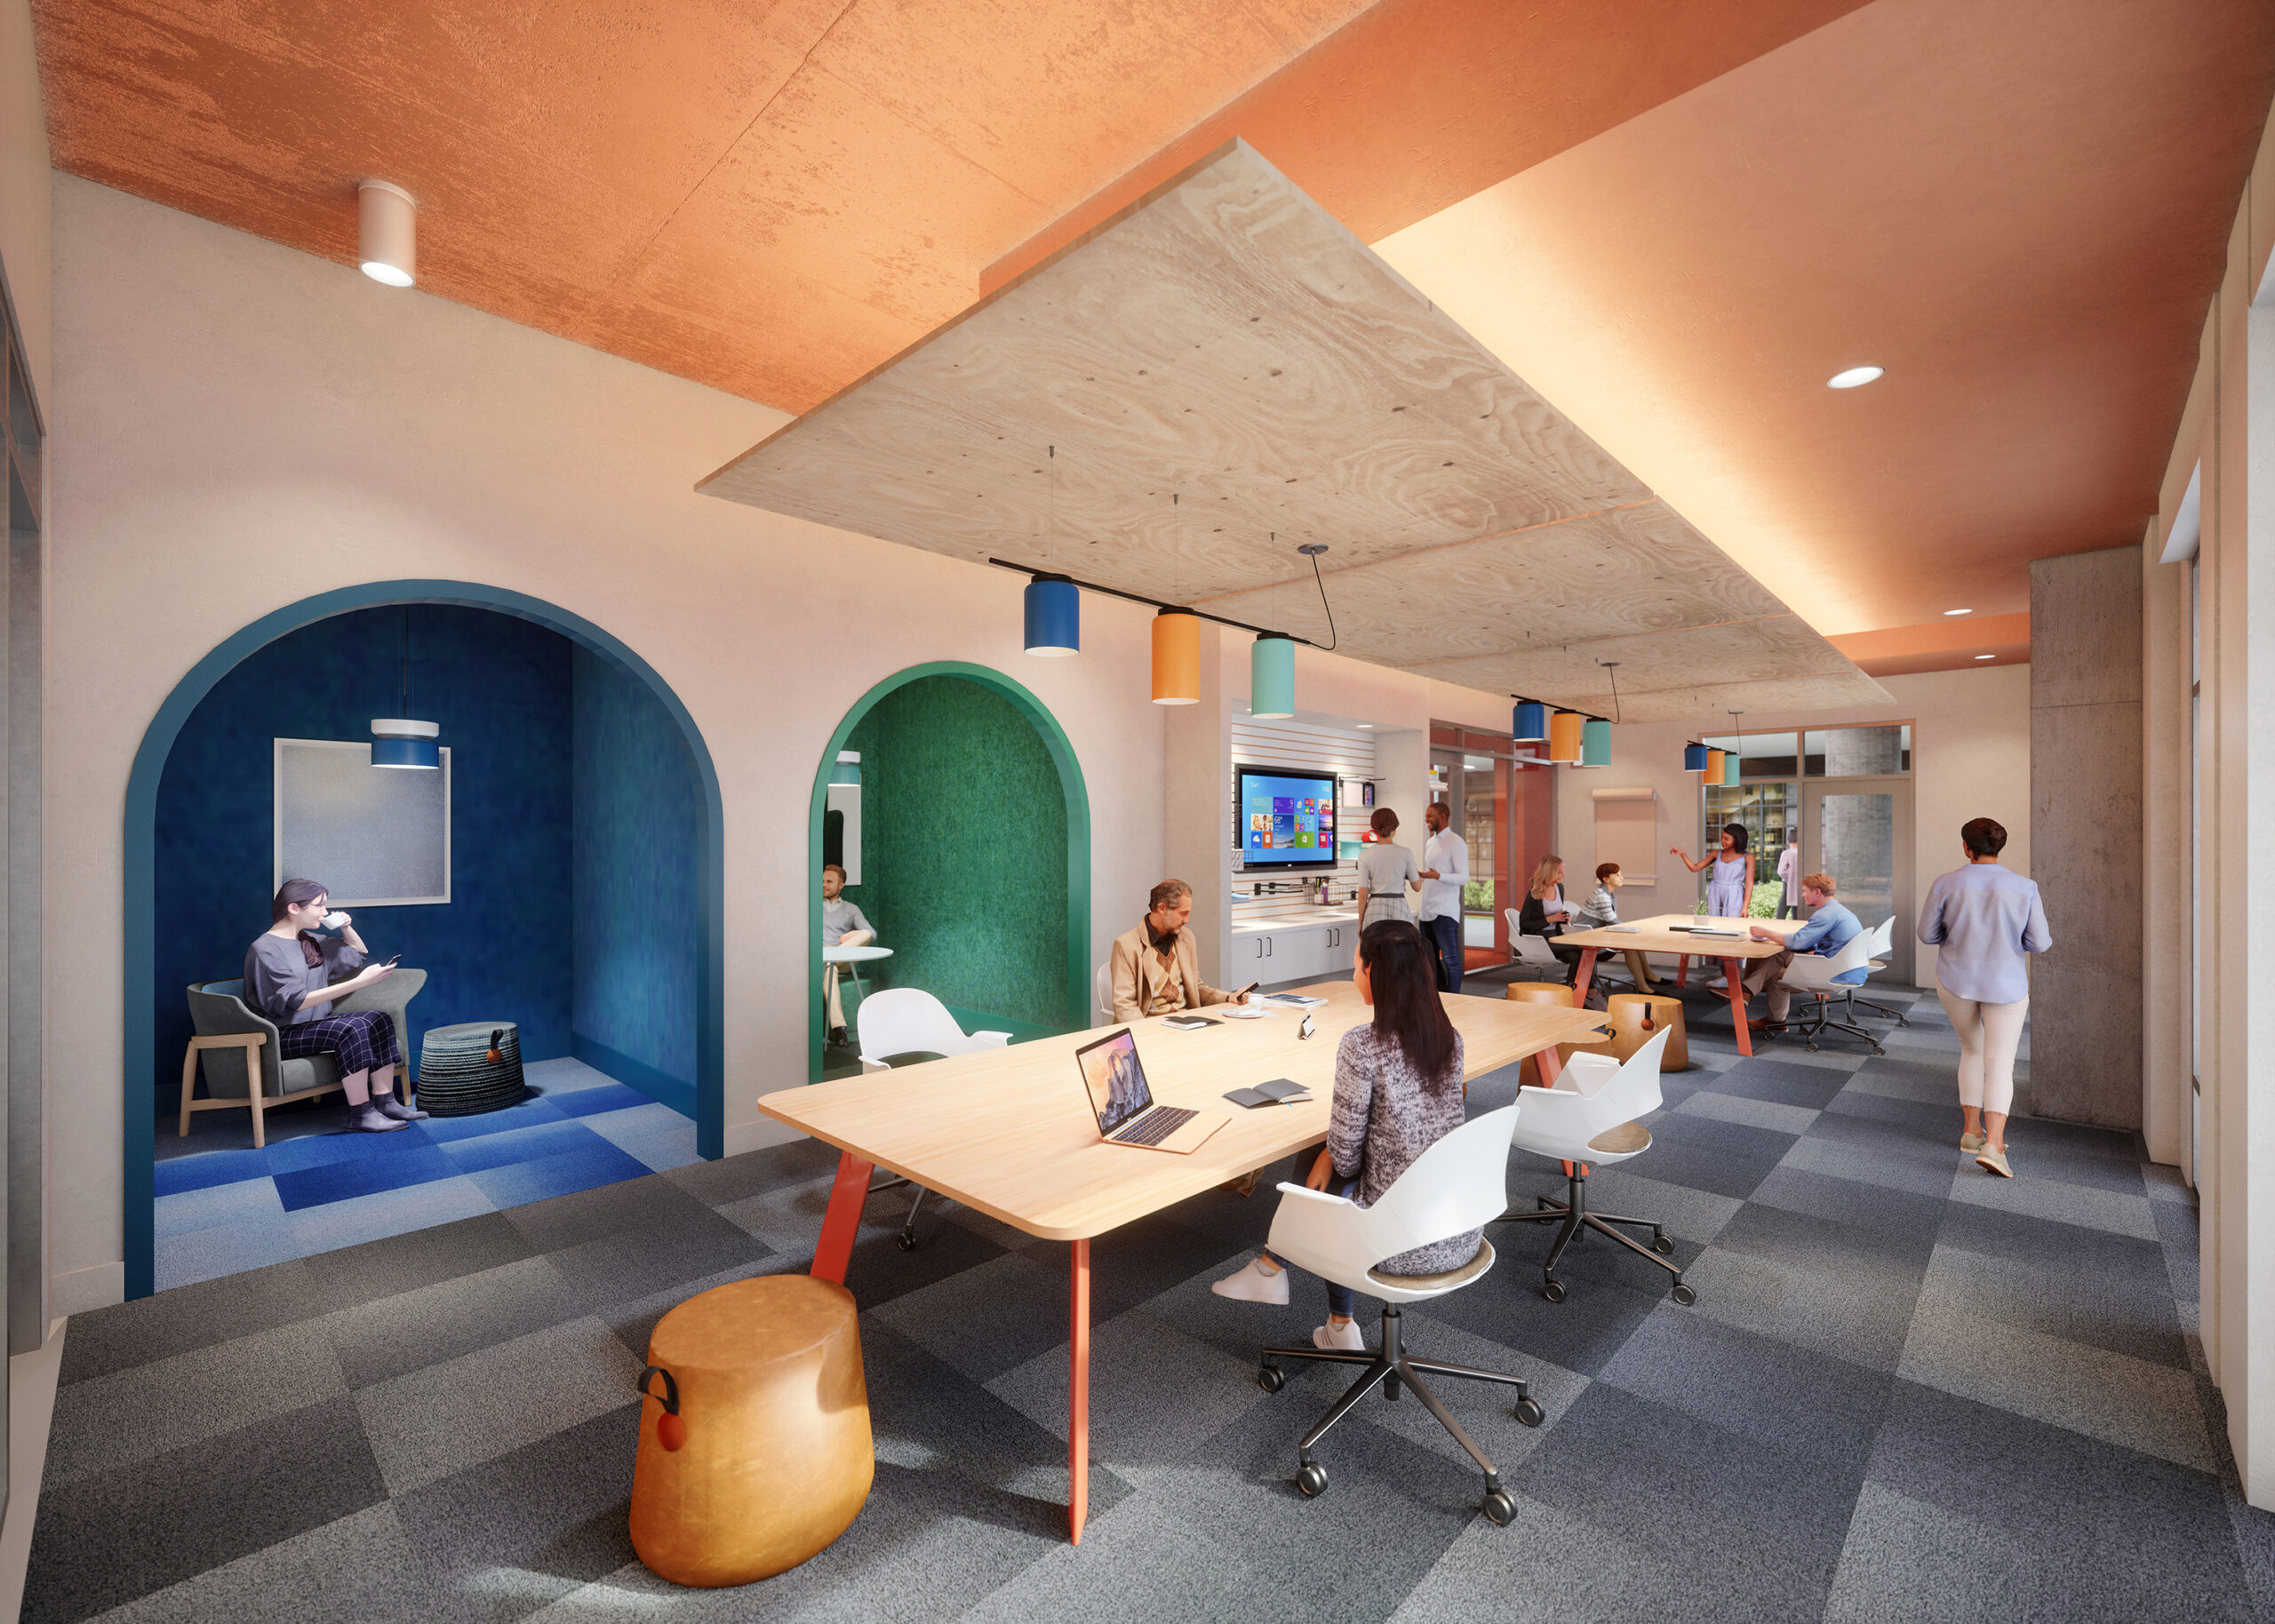 Coworking space with nooks for focused work